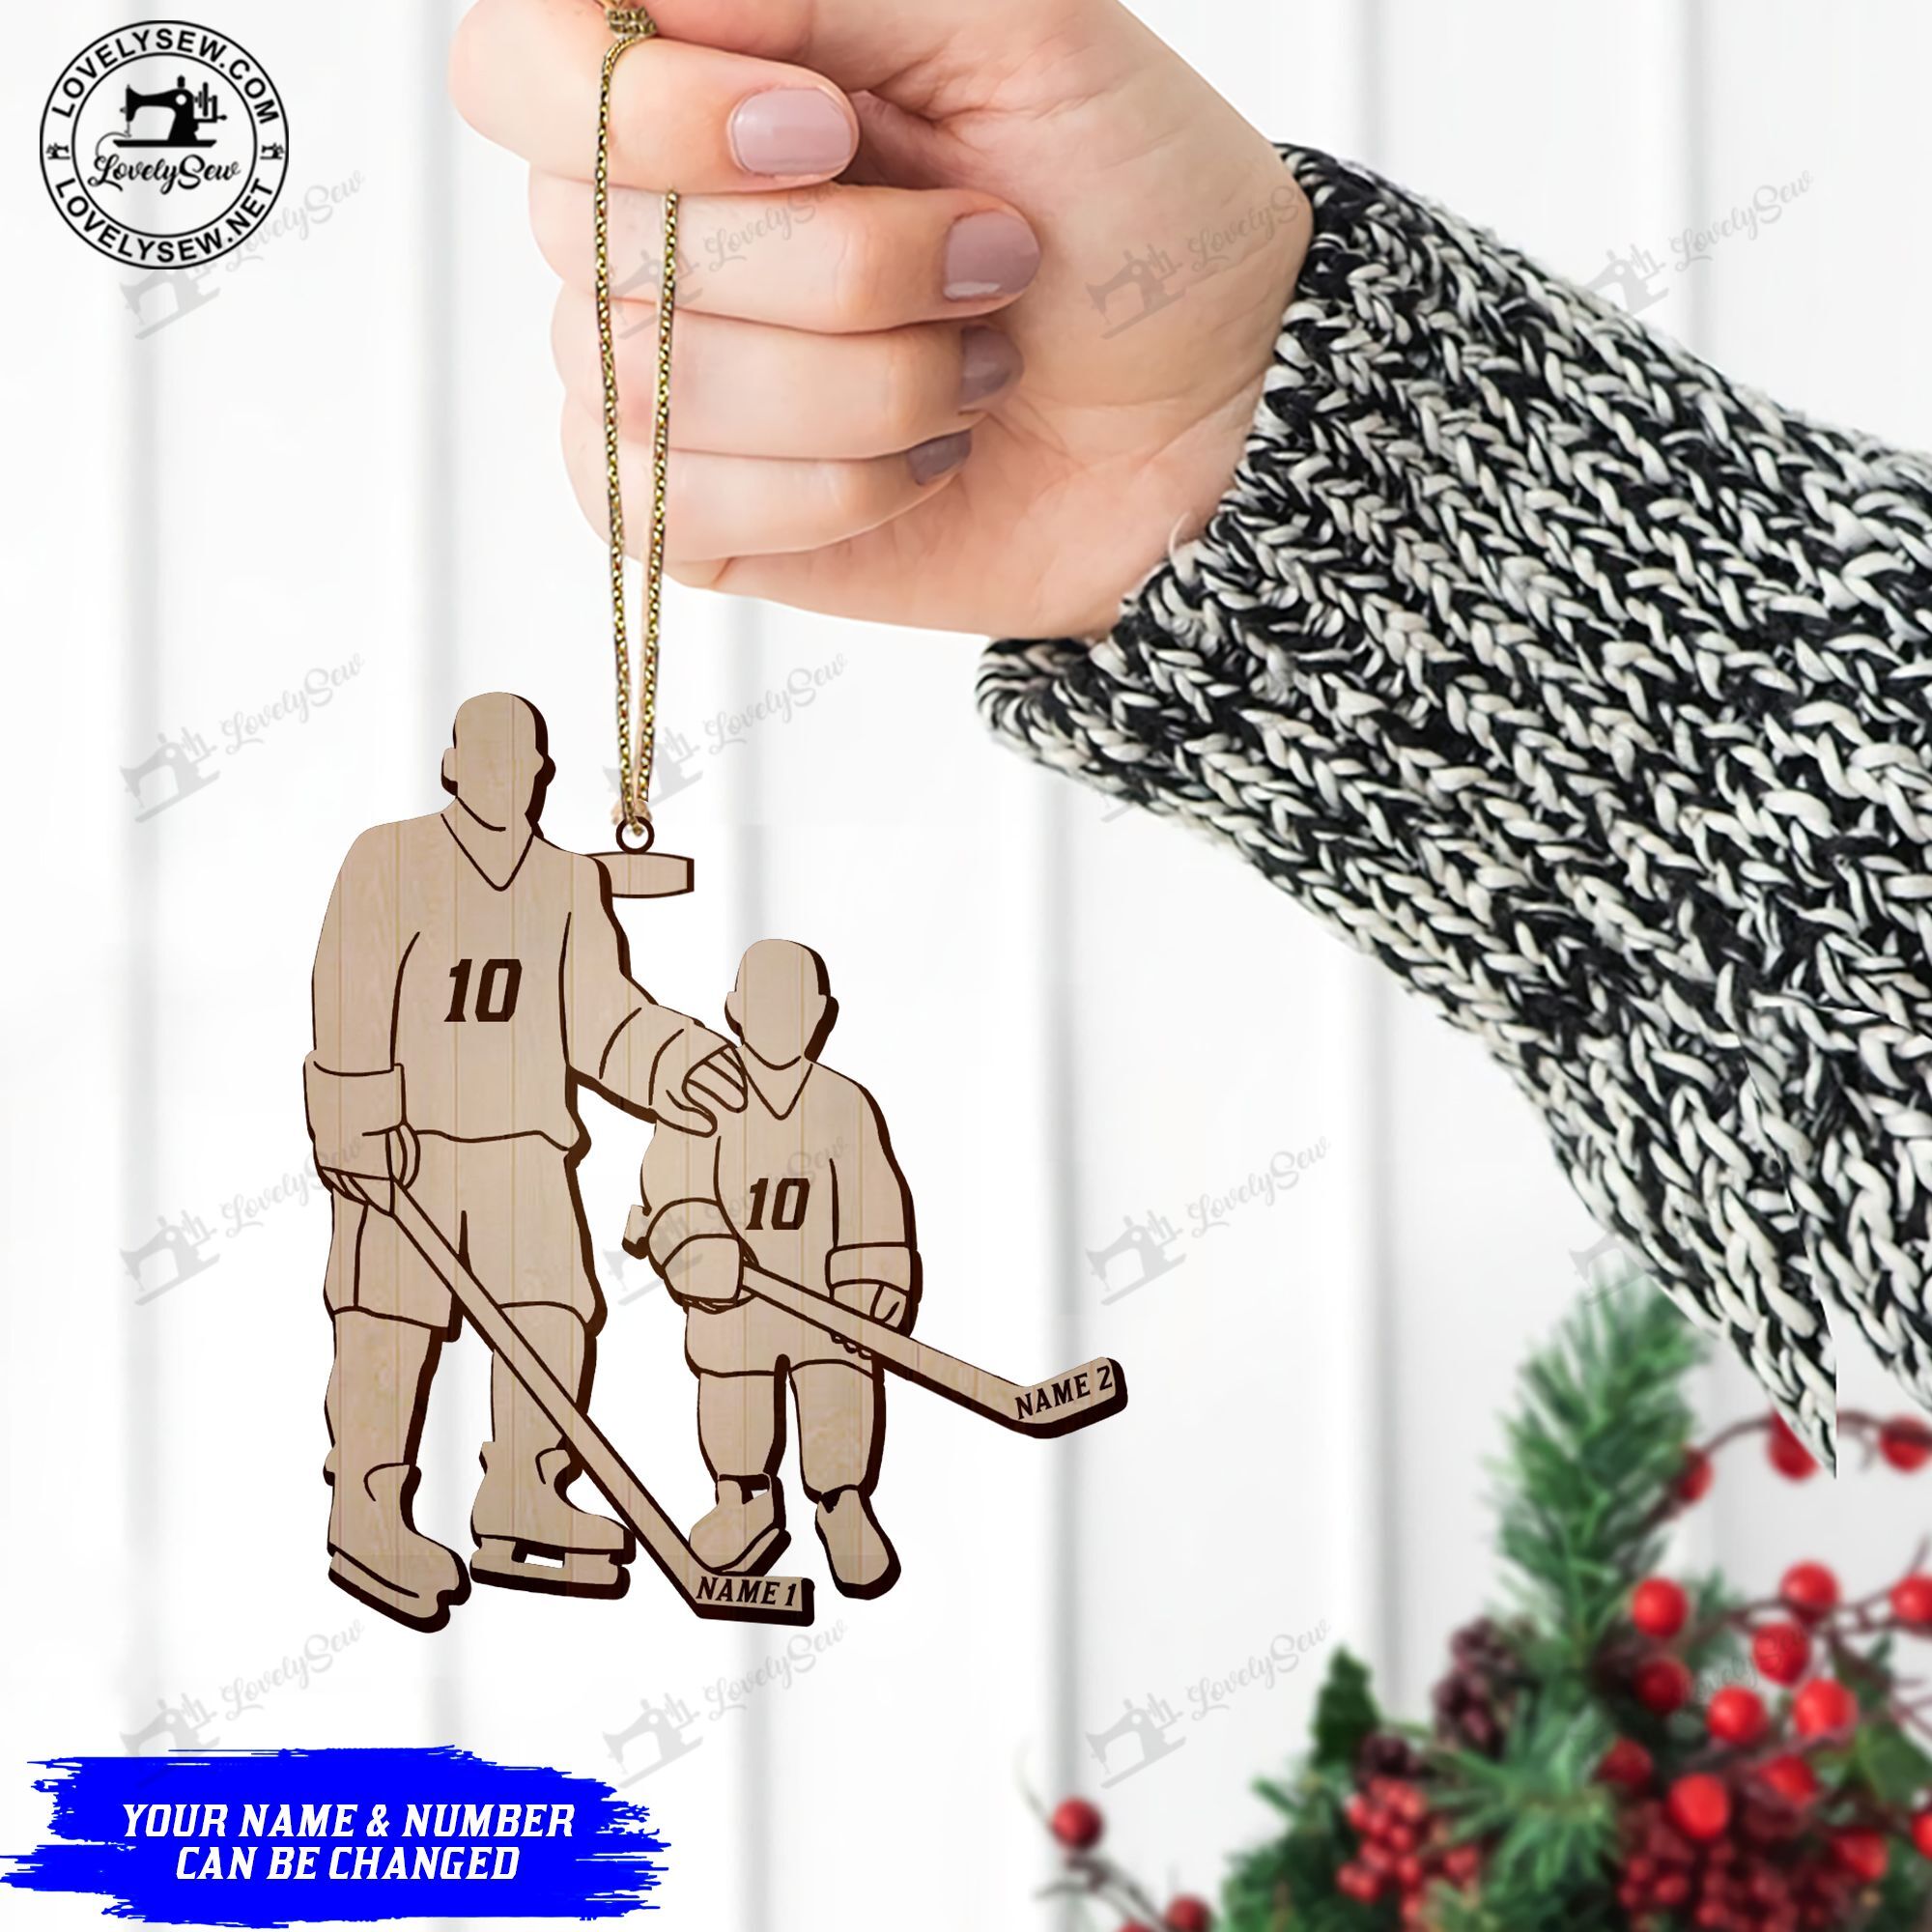 Gifts For Hockey Players- Hockey Father & Son Personalized Ornament Bix21110101